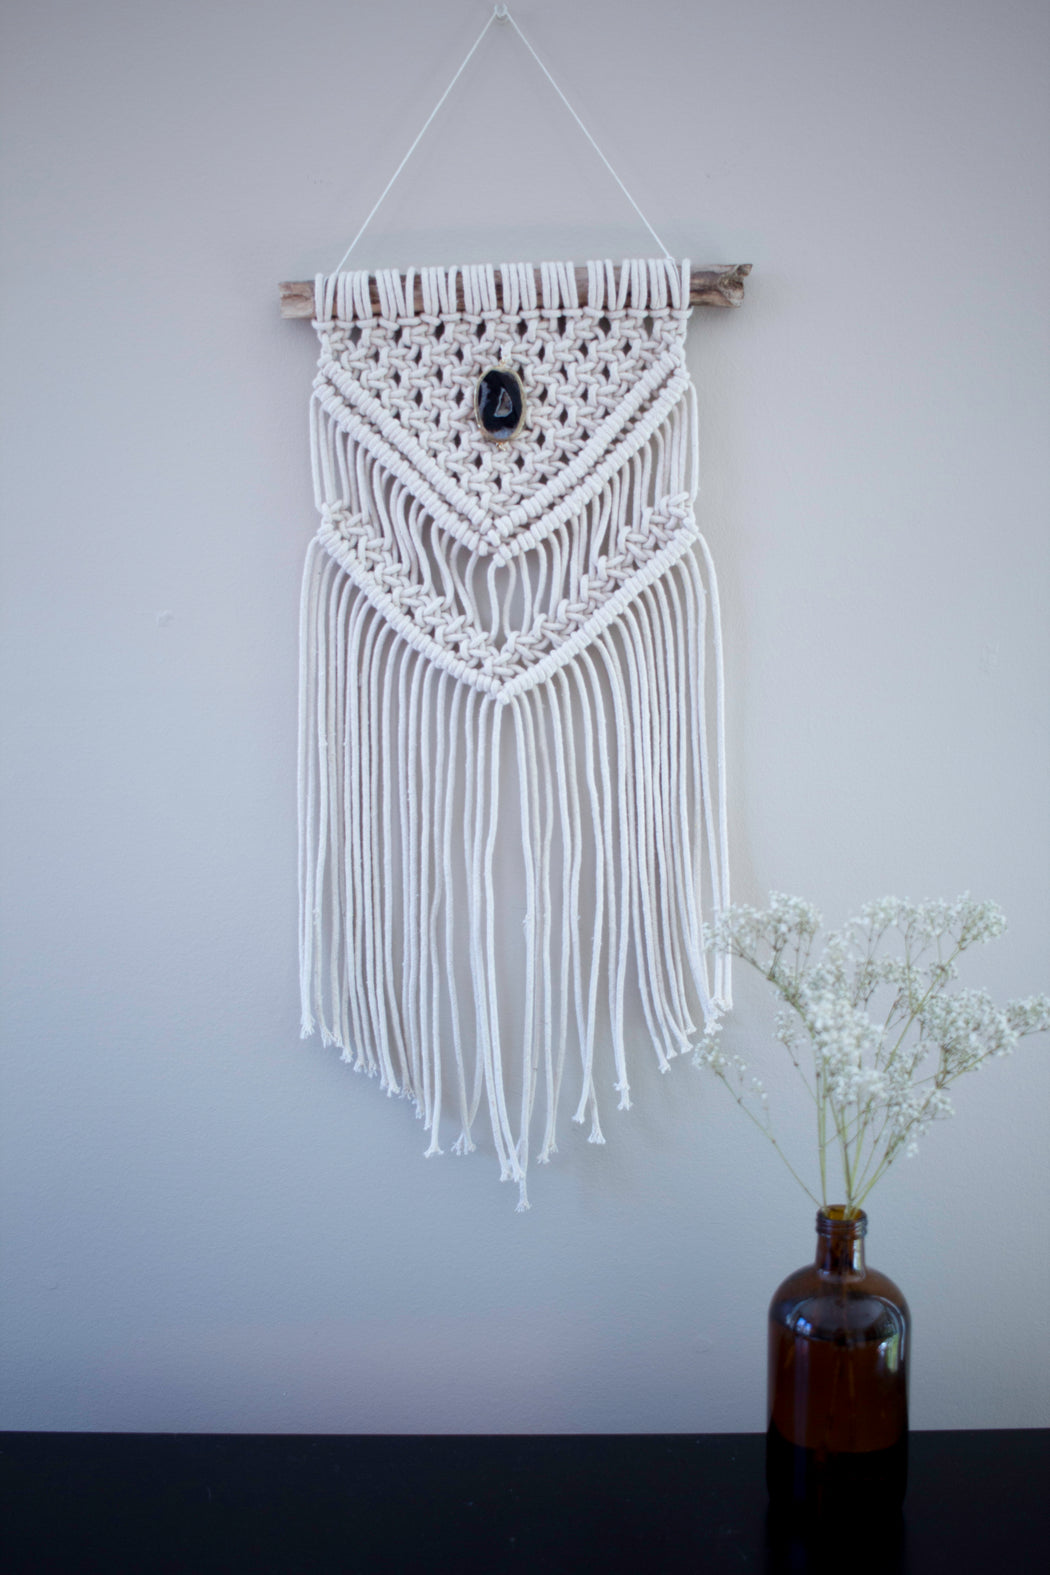 Medium Macrame Wall Hanging 100% Cotton Rope and Agate Slice